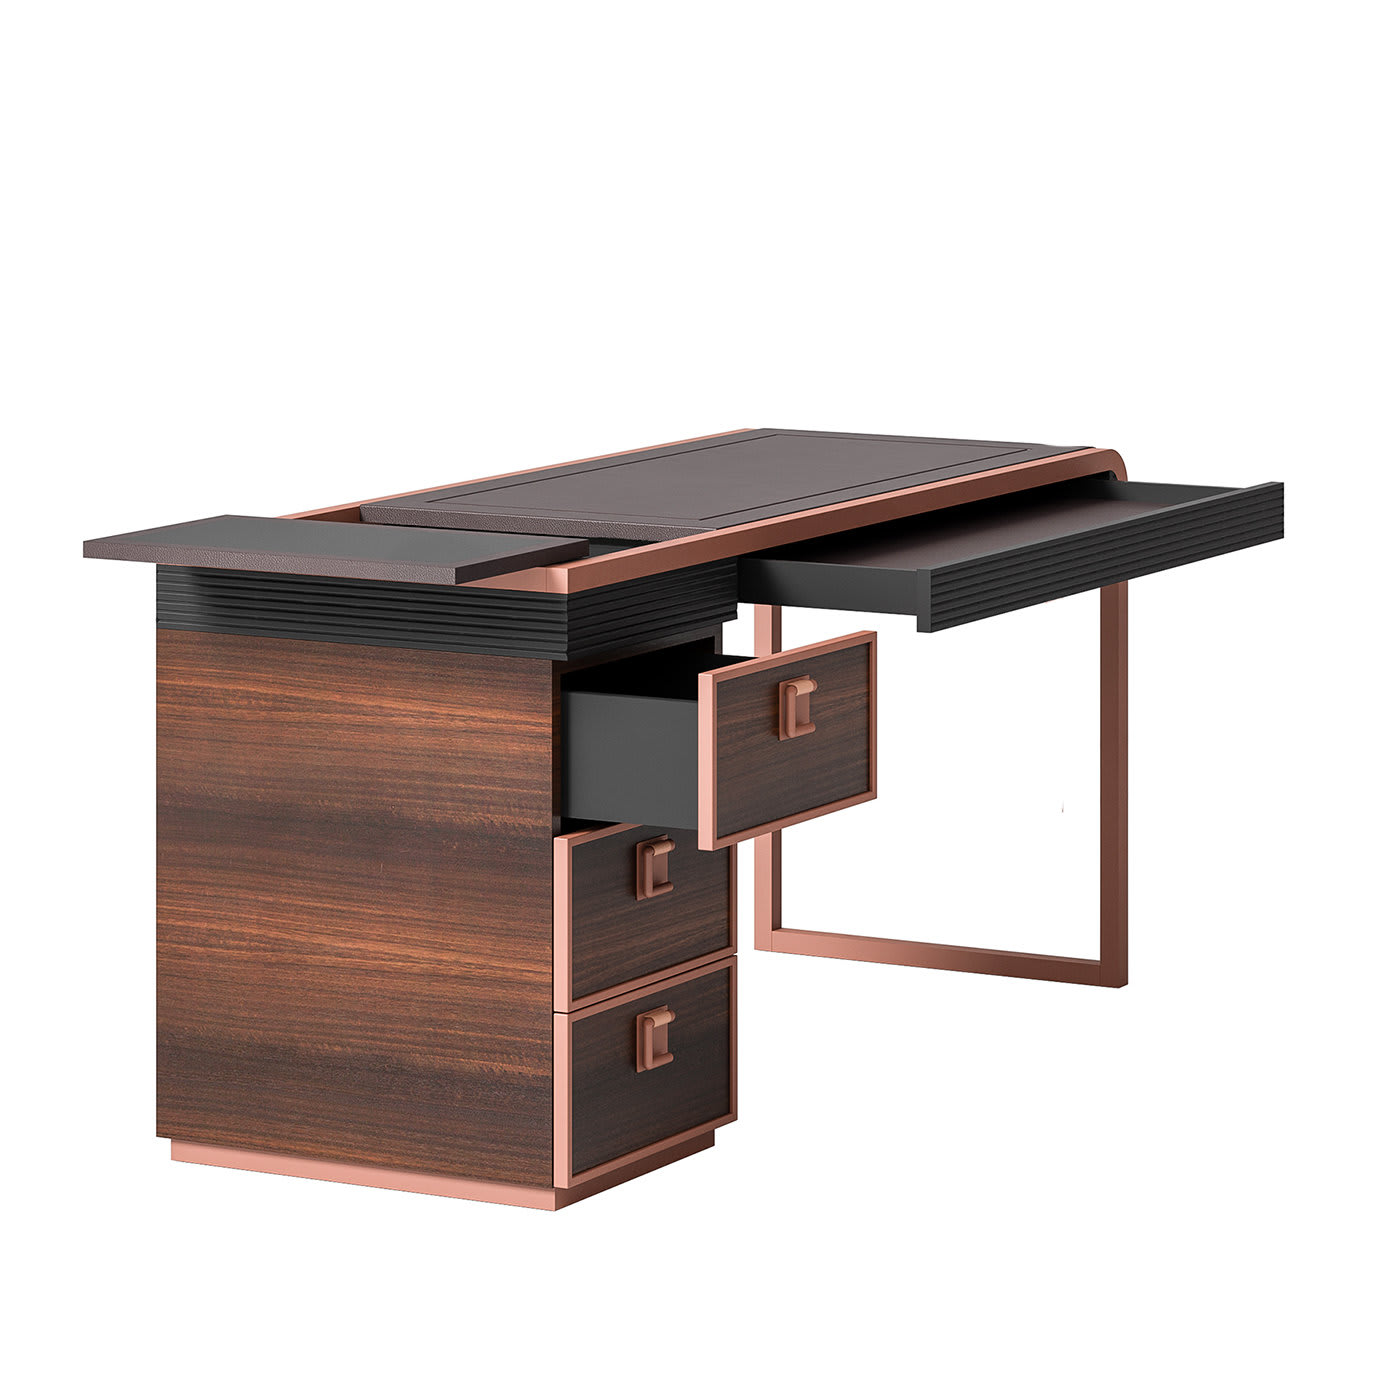 Wood and Leather Desk - CPRN Homood